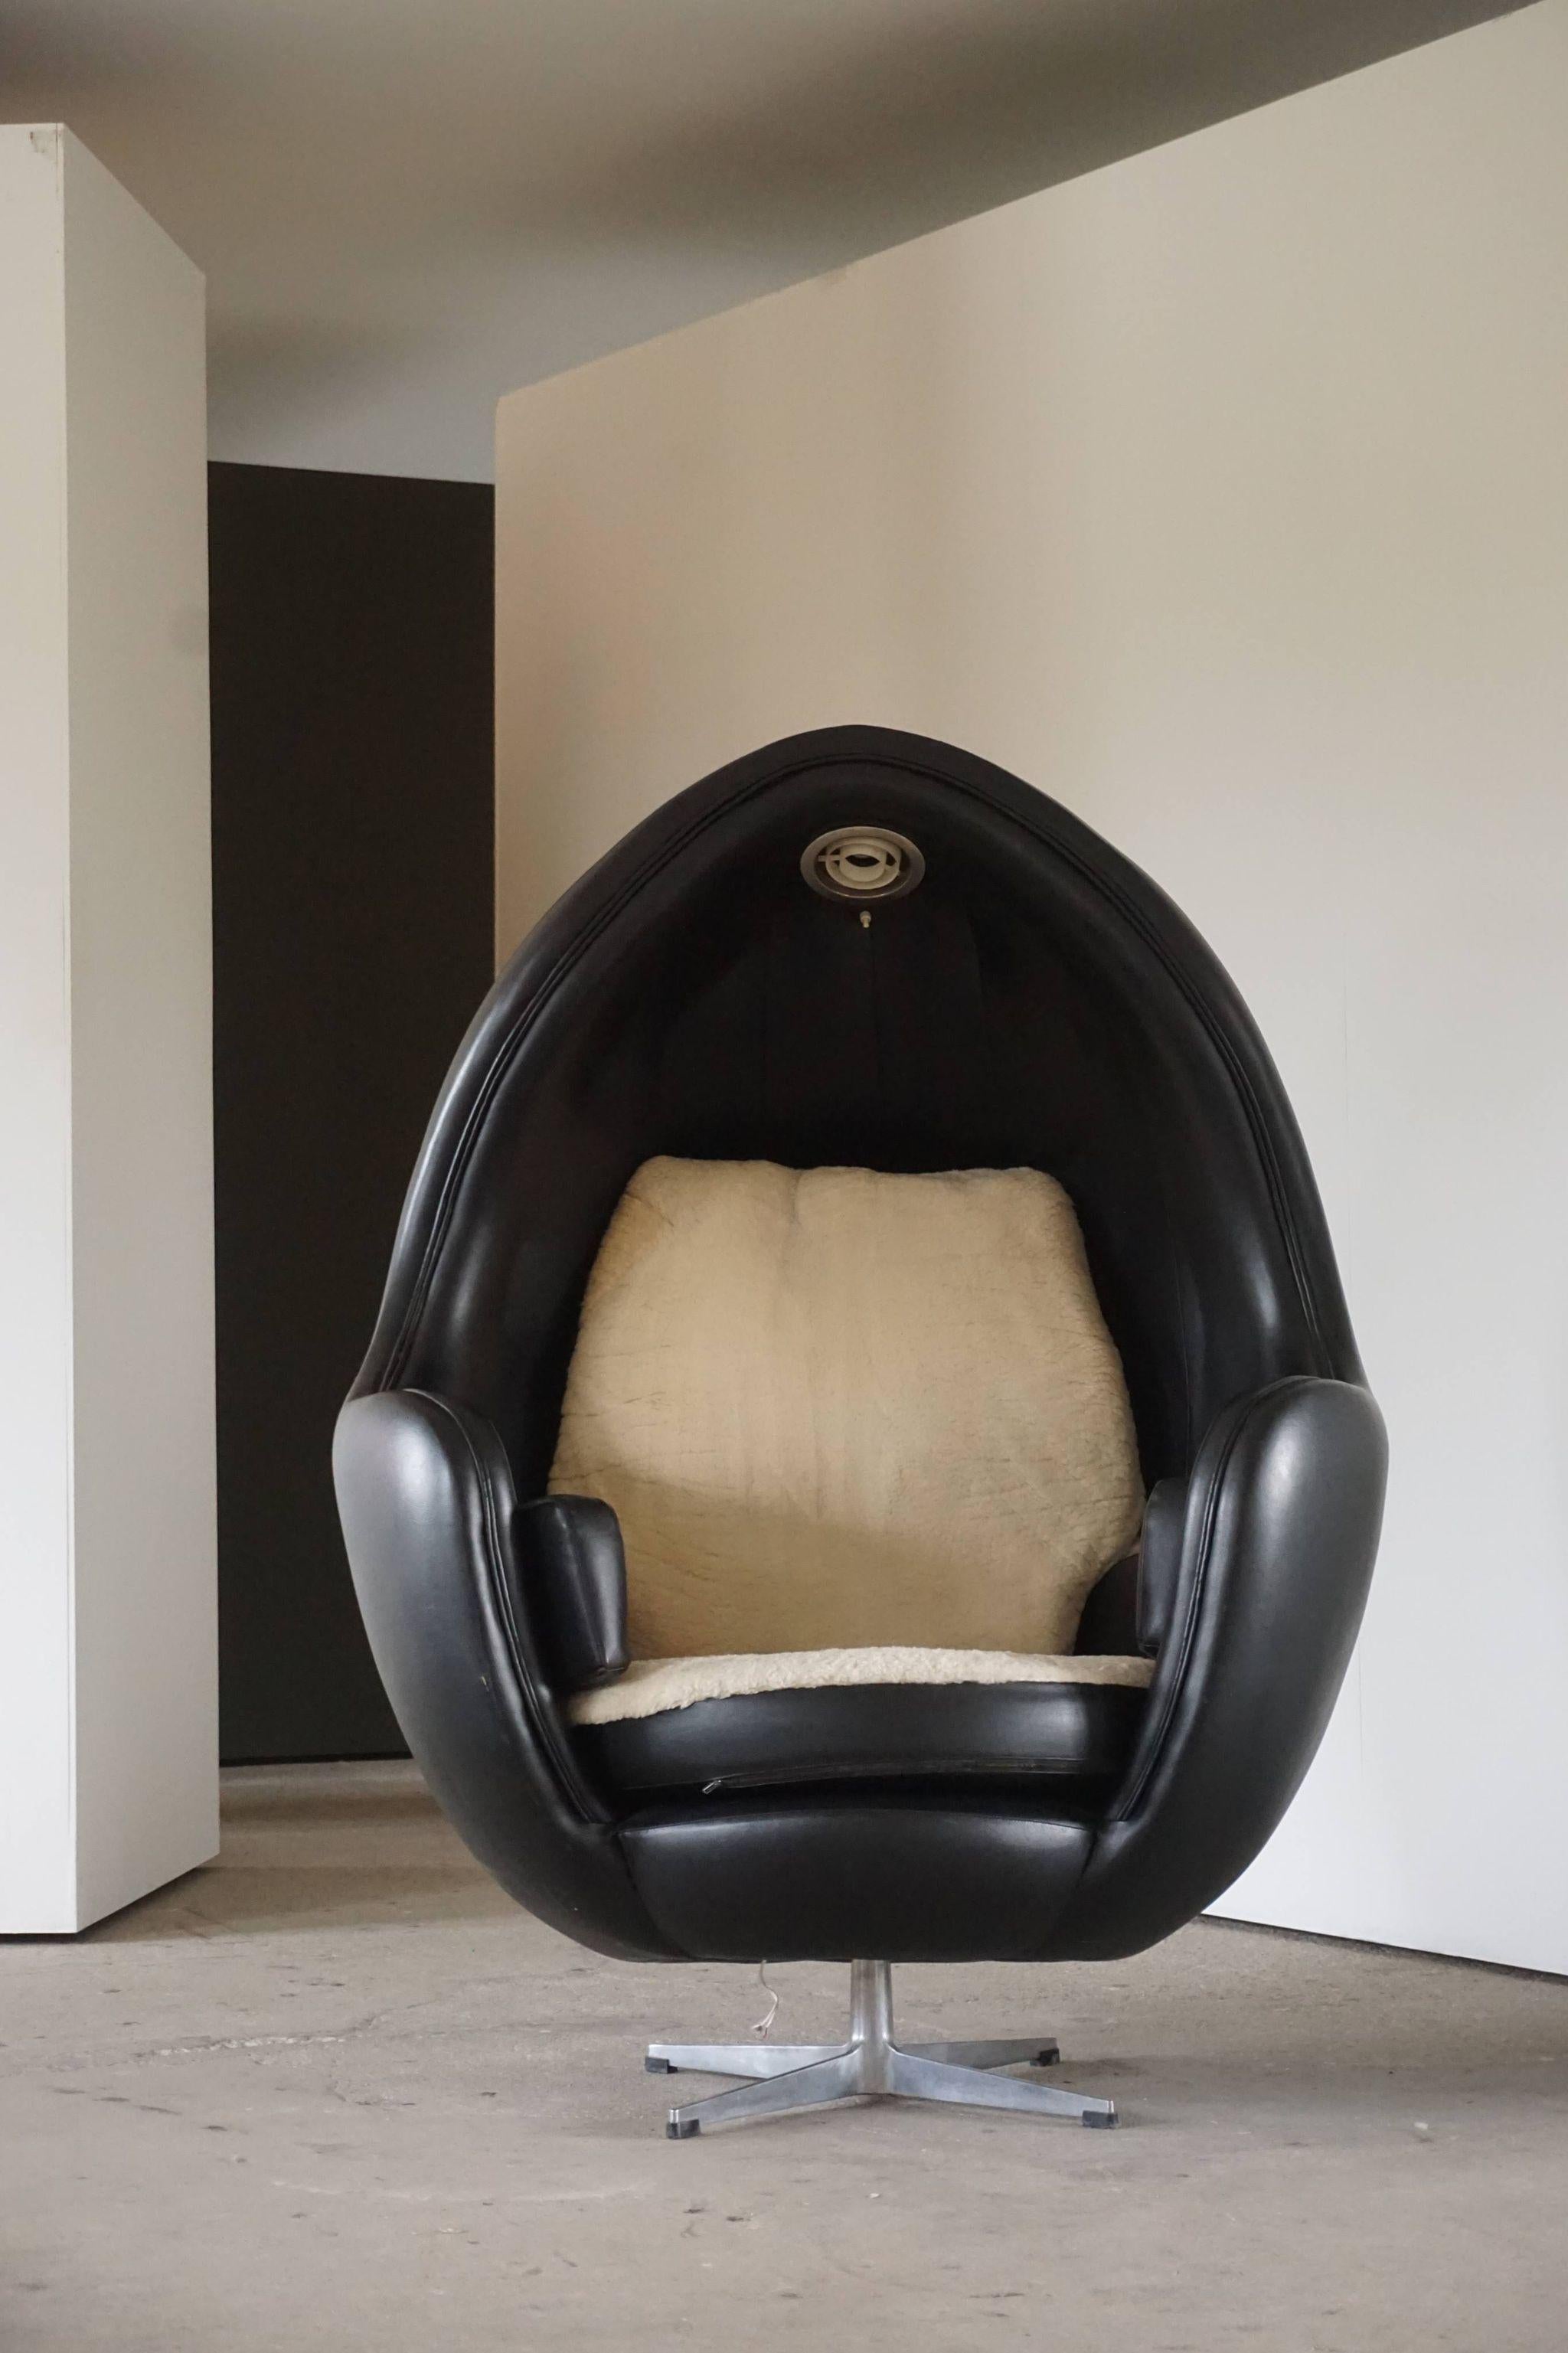 Steel Funky European Space Chair in Leather and Lambwool, Shaped like an Egg, 1980s